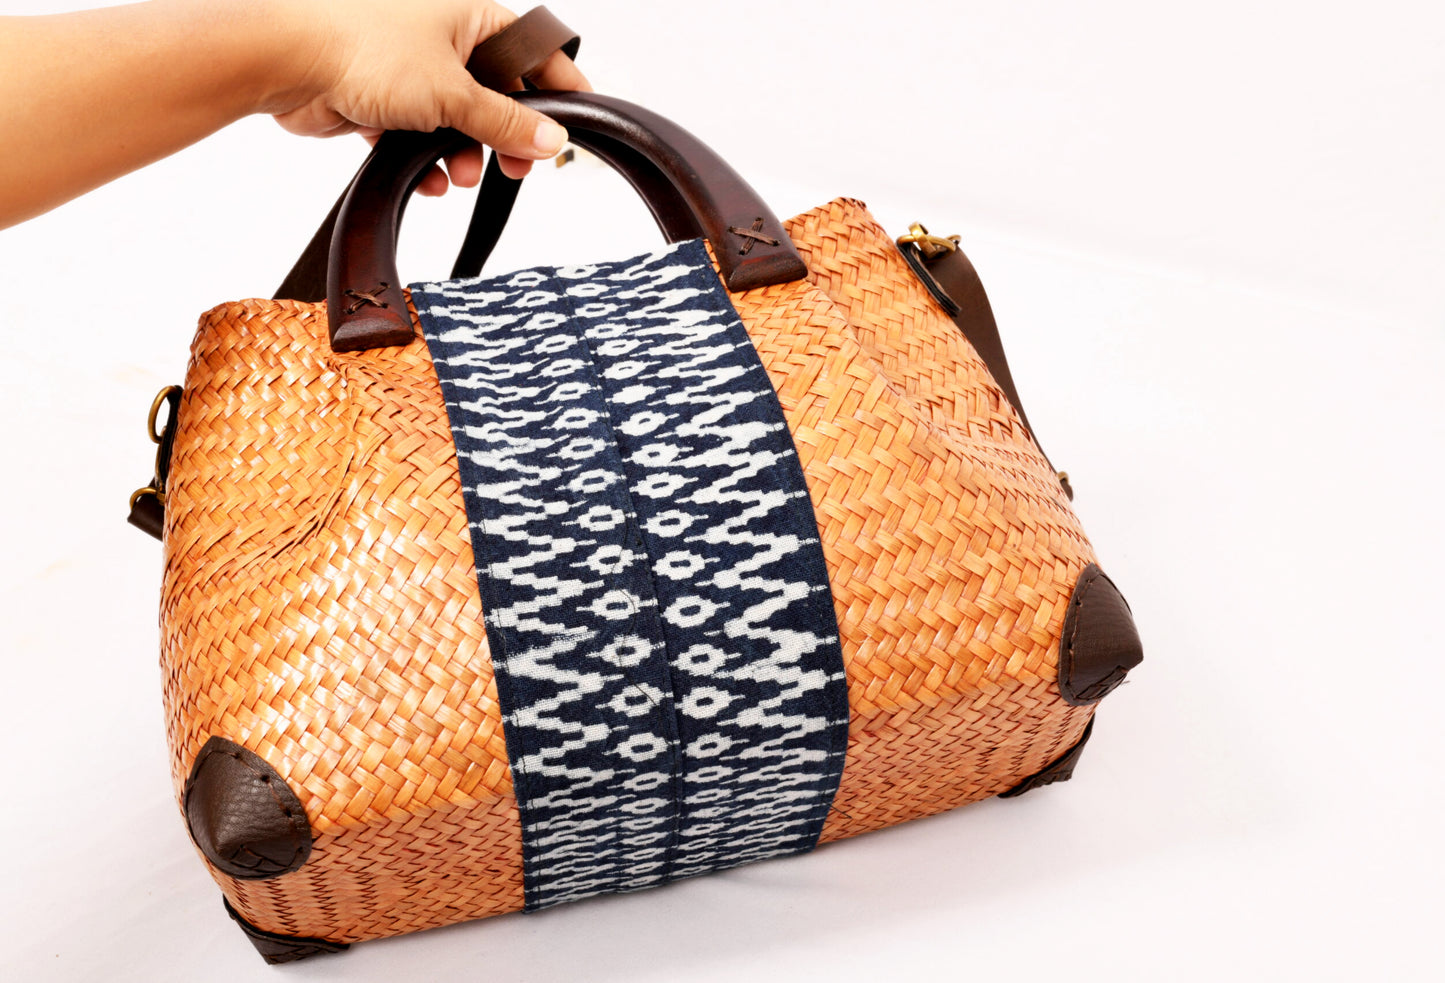 Blue and Tan Woven Straw Bag